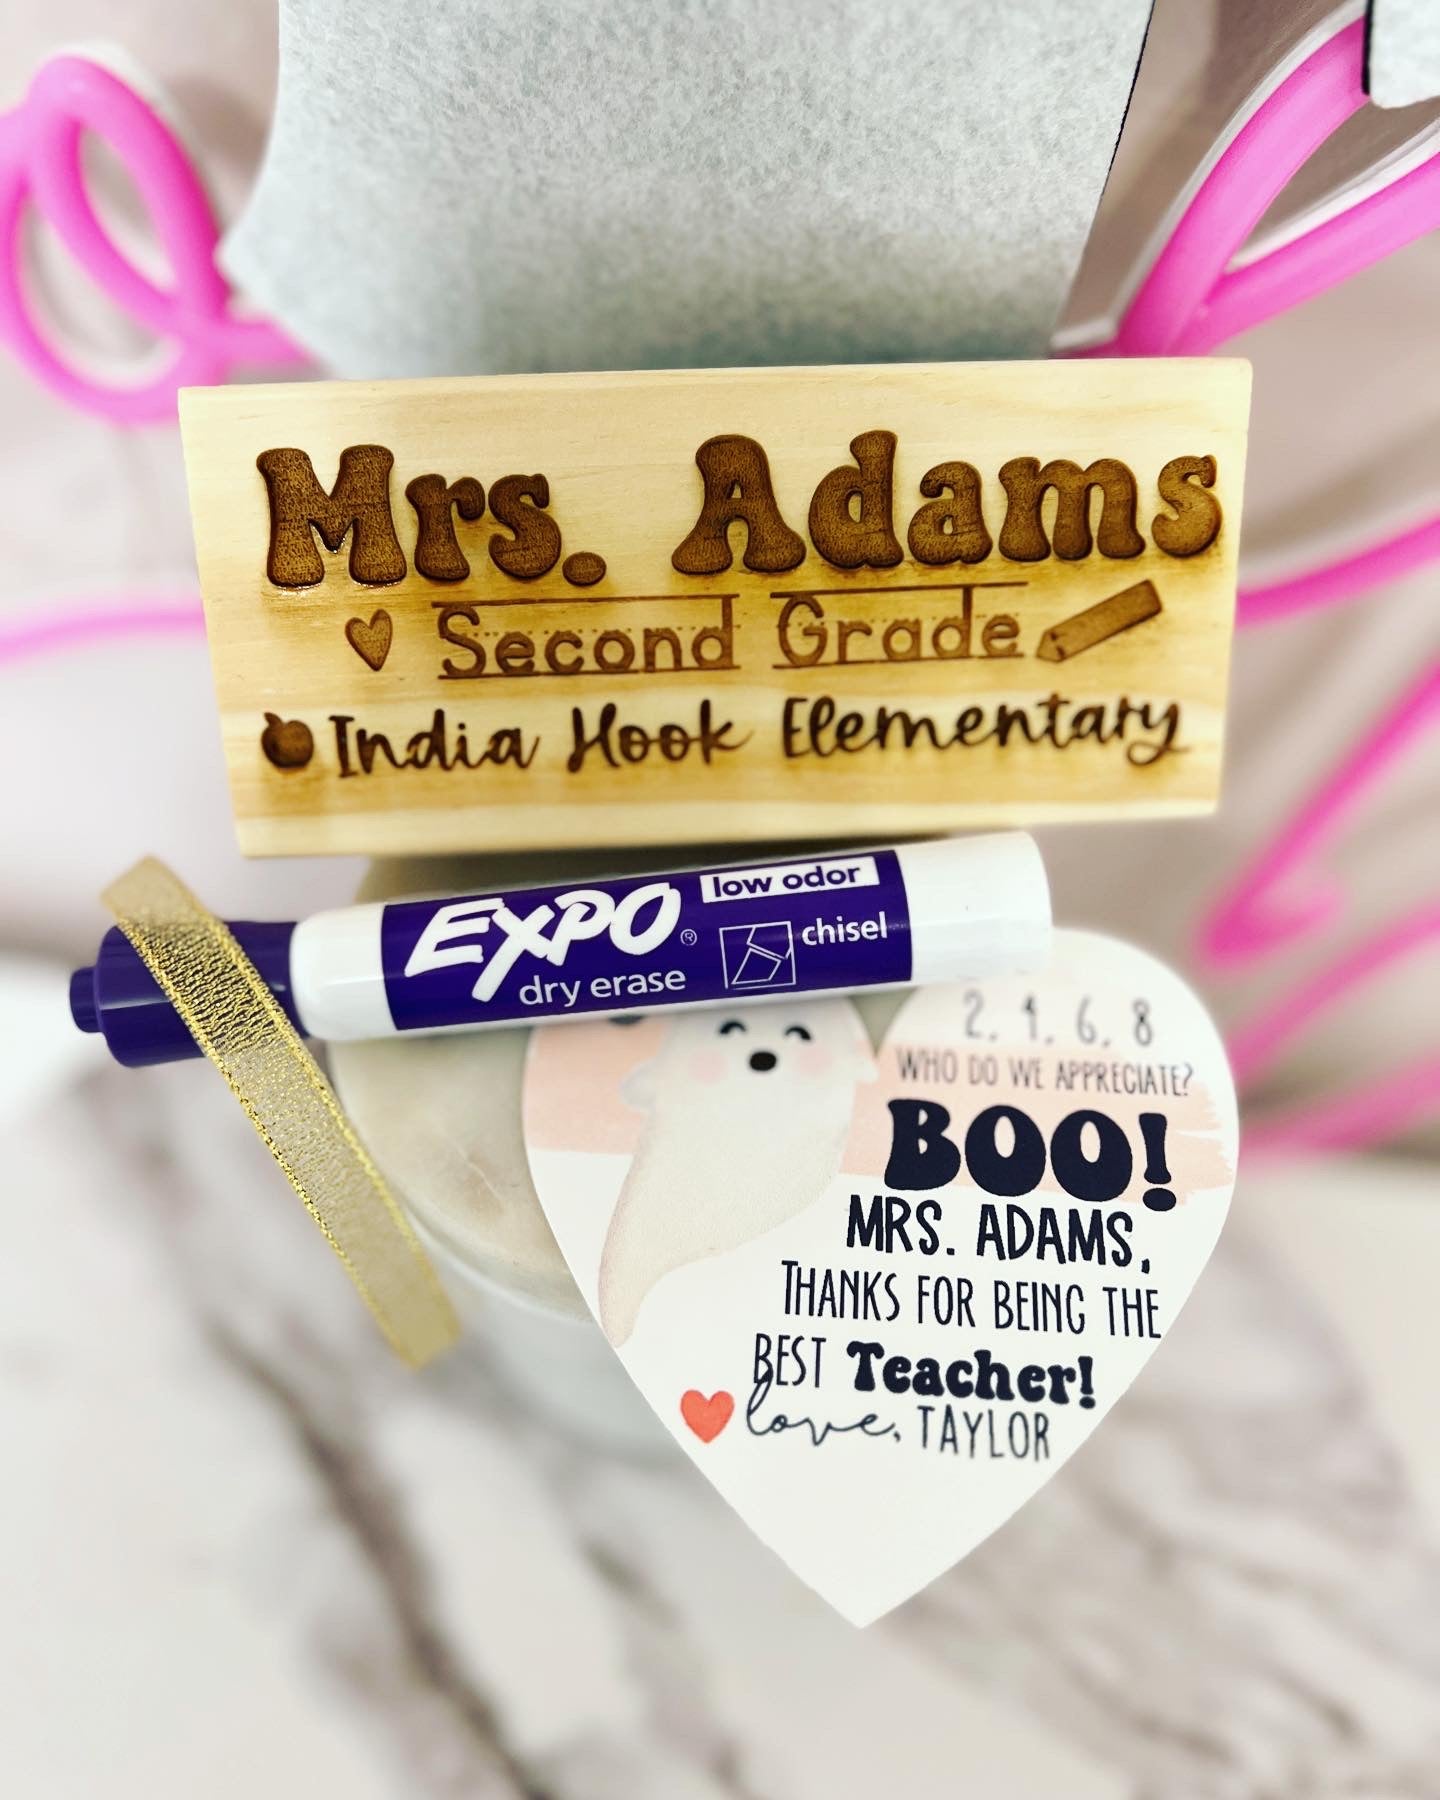 Personalized Engraved Whiteboard Eraser gift w/ Expo Marker, Personalized Halloween Card, Holographic cellophane gift bag tied with ribbon!